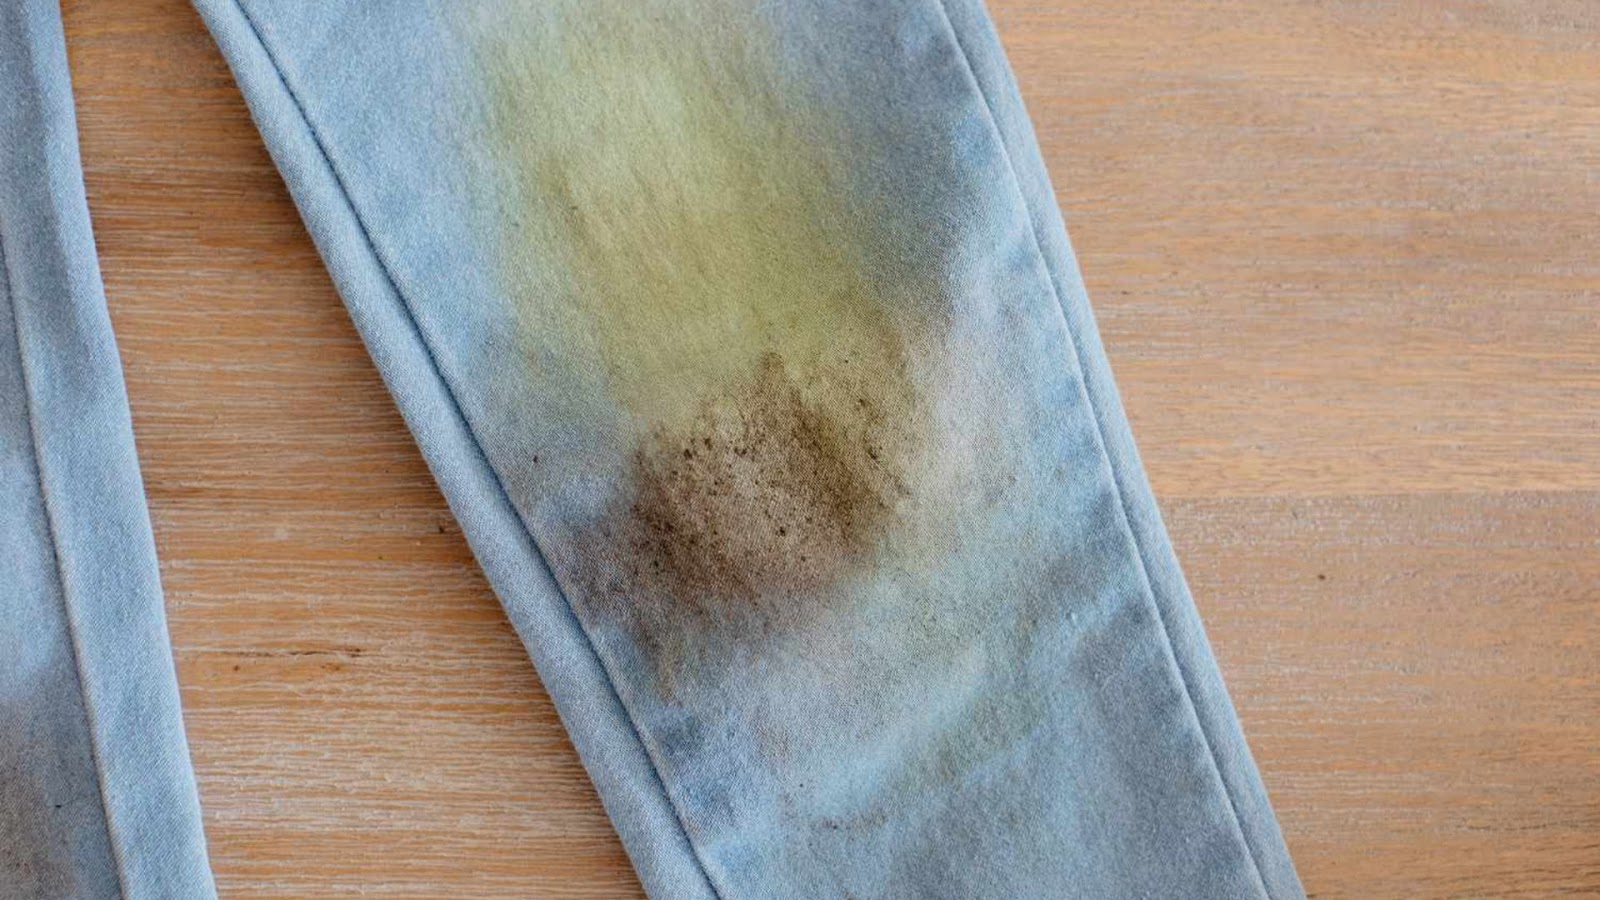 What Gets Grass Stains Out Of Jeans